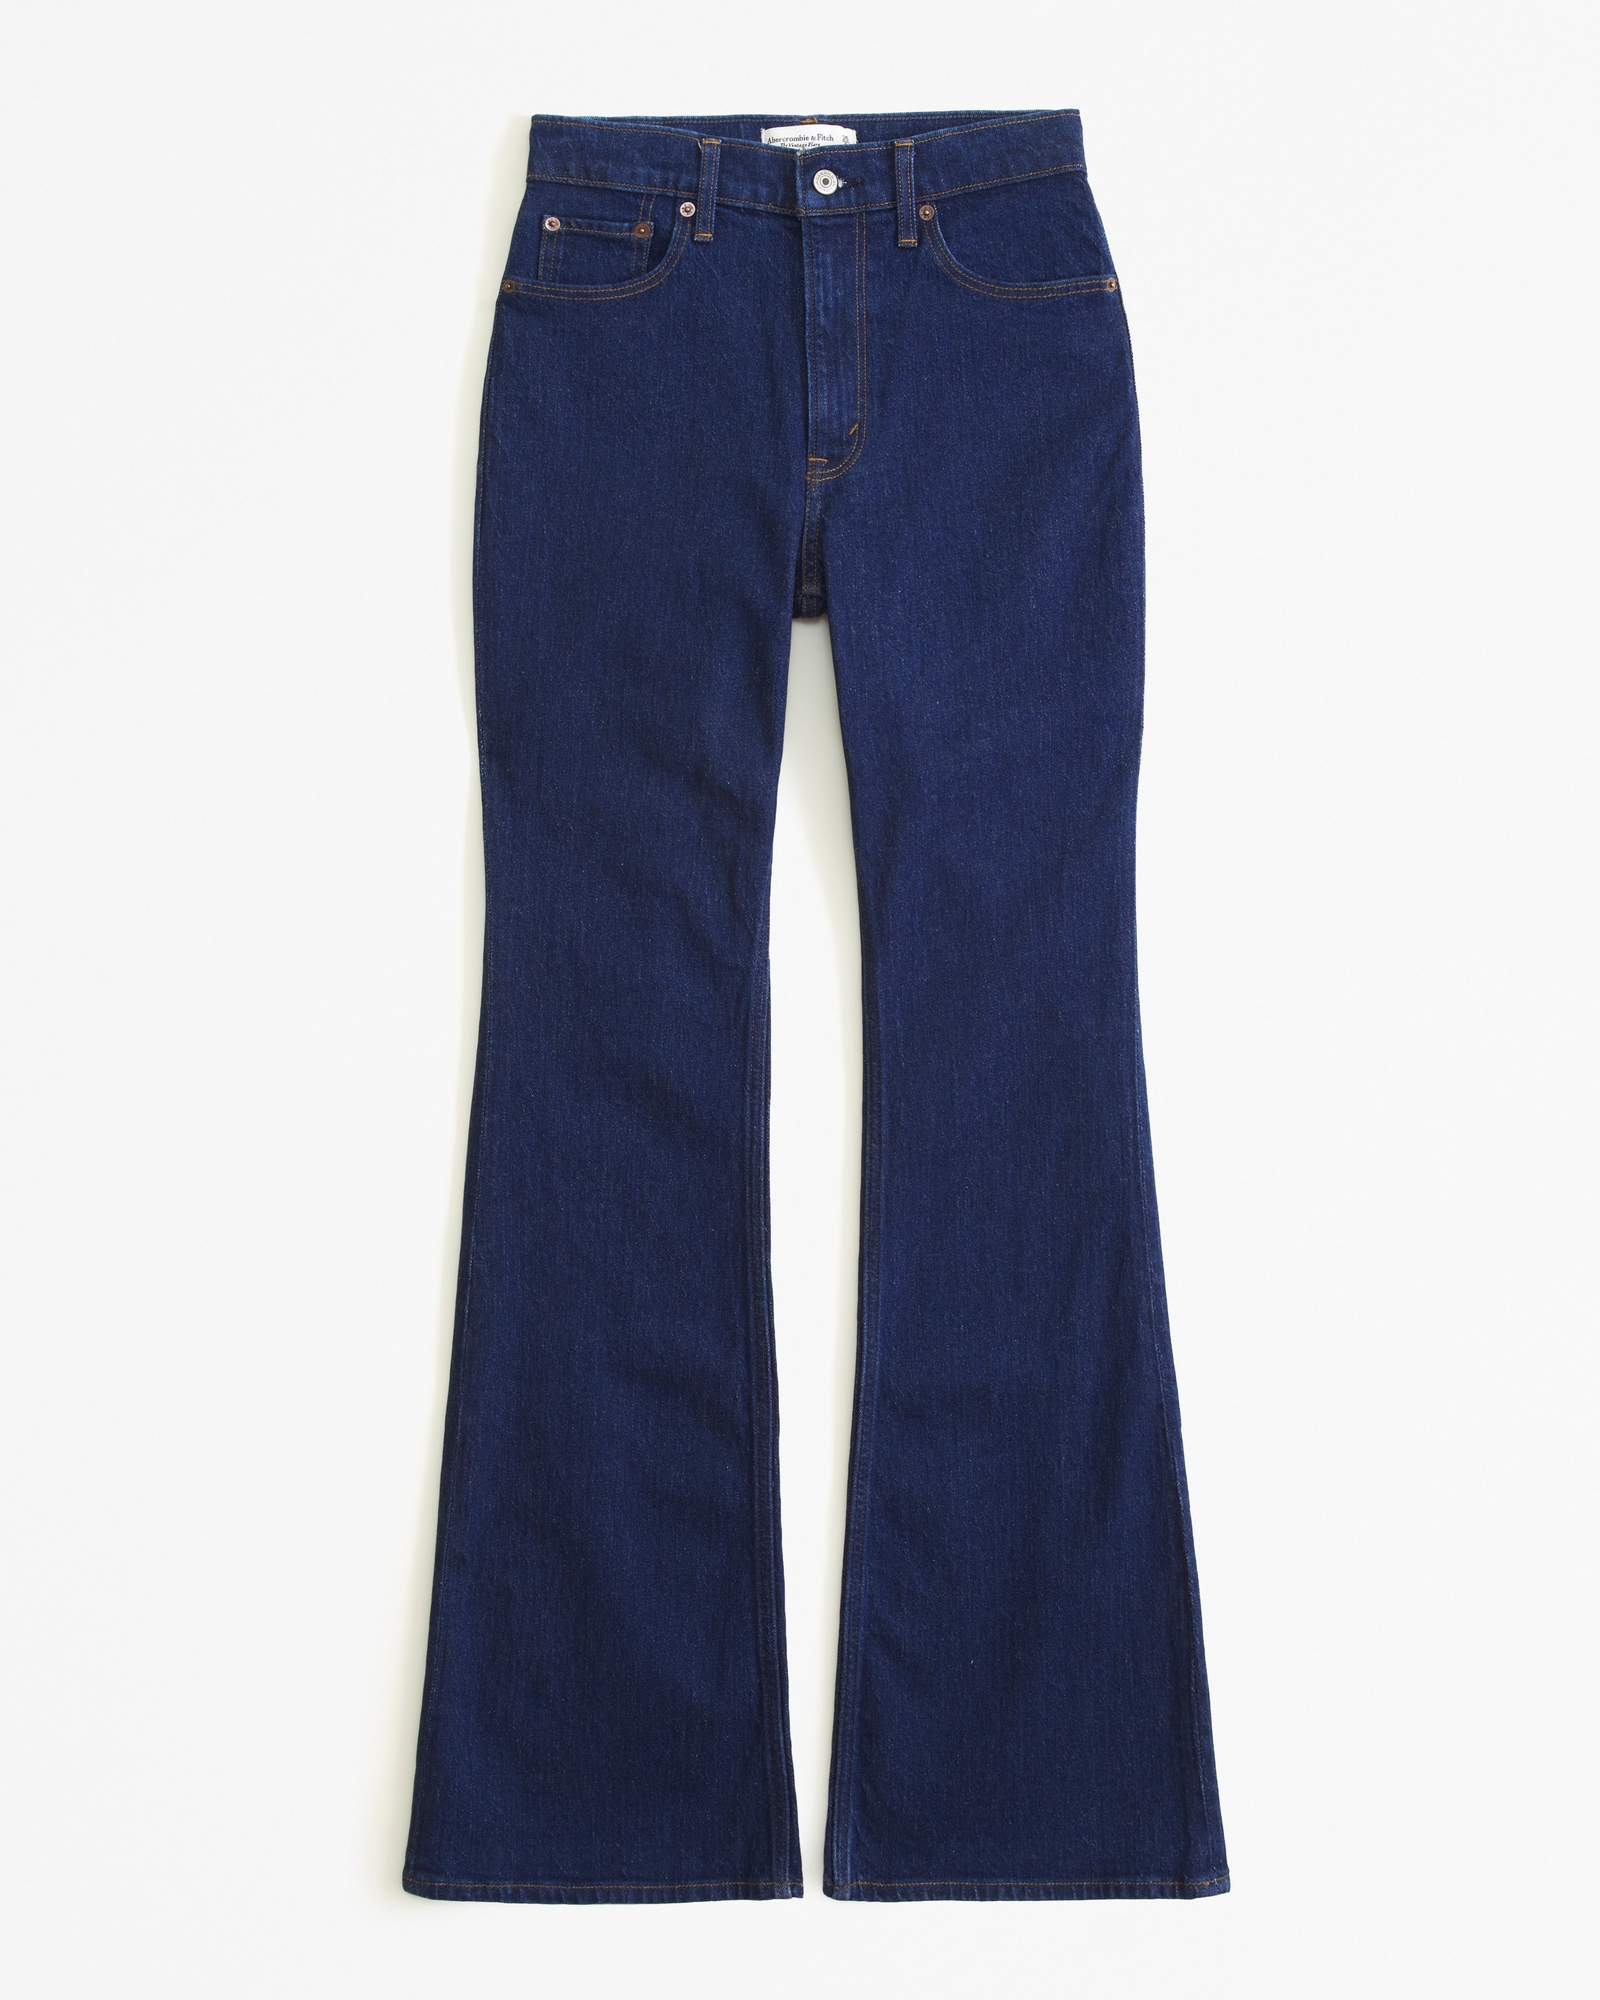 abercrombie-vintage-flare-jeans-outfit